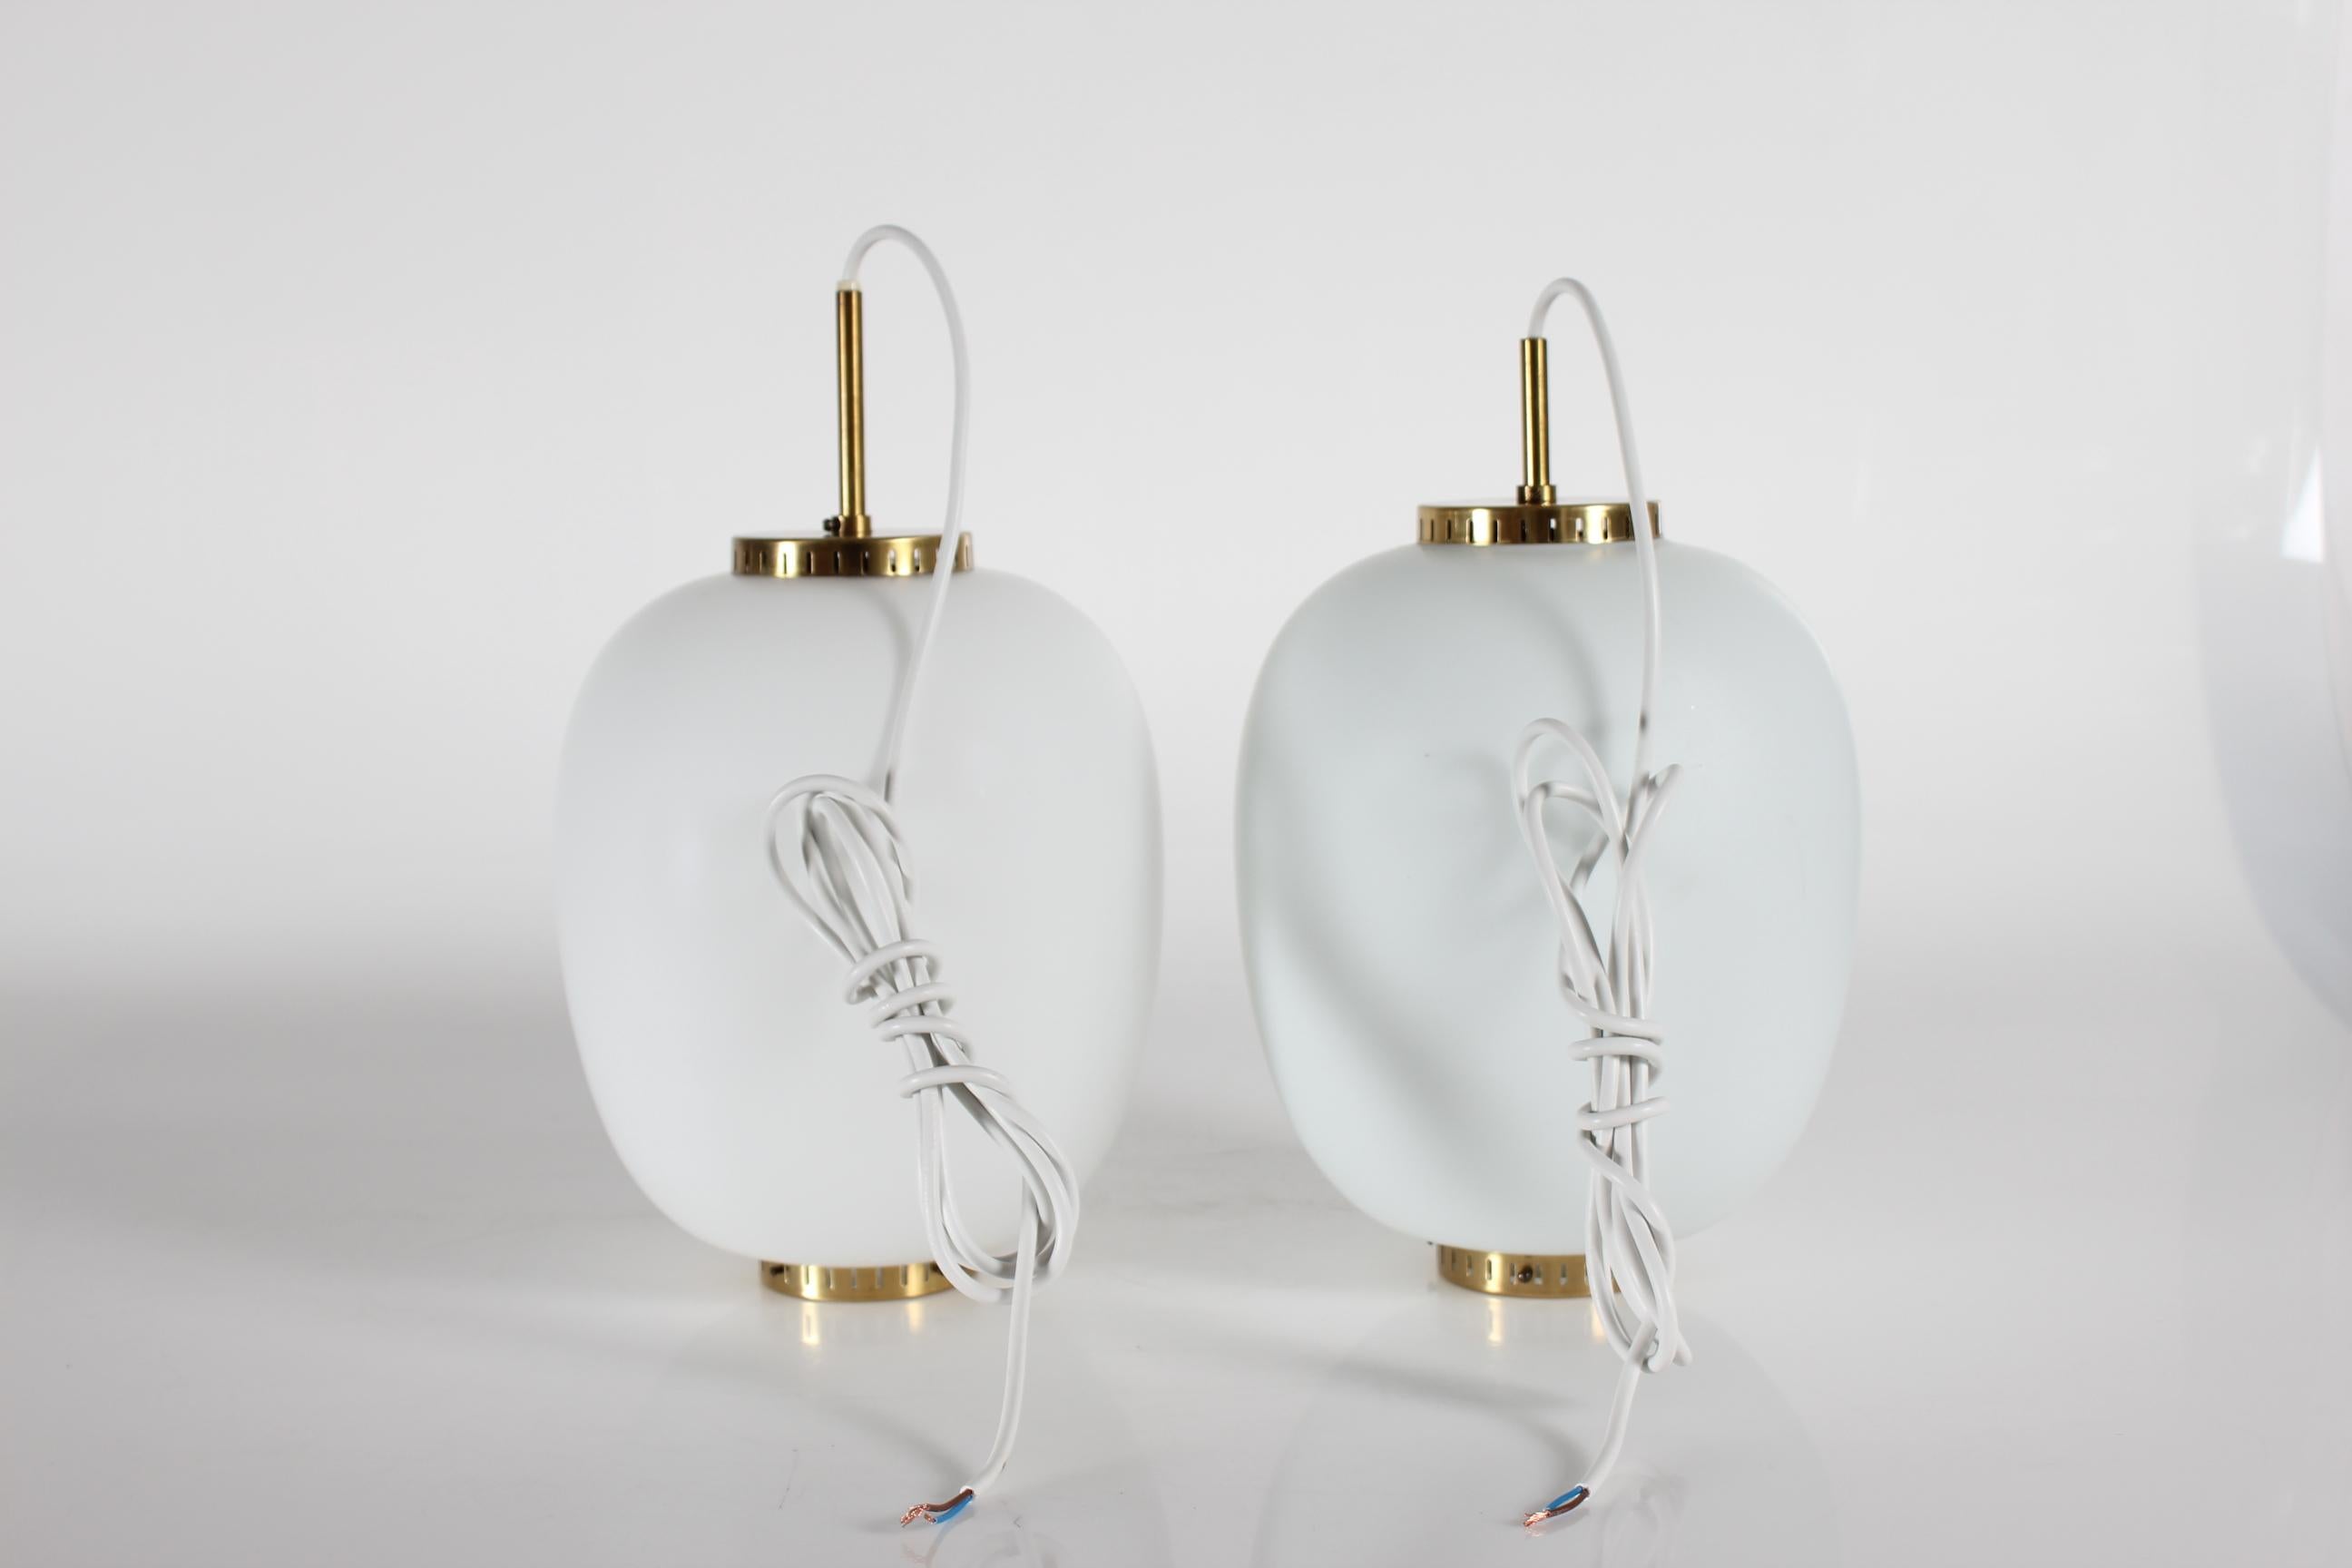 Set of 2 Bent Karlby China Pendants Made of Opaline Glass + Brass by Lyfa, 1960s For Sale 1